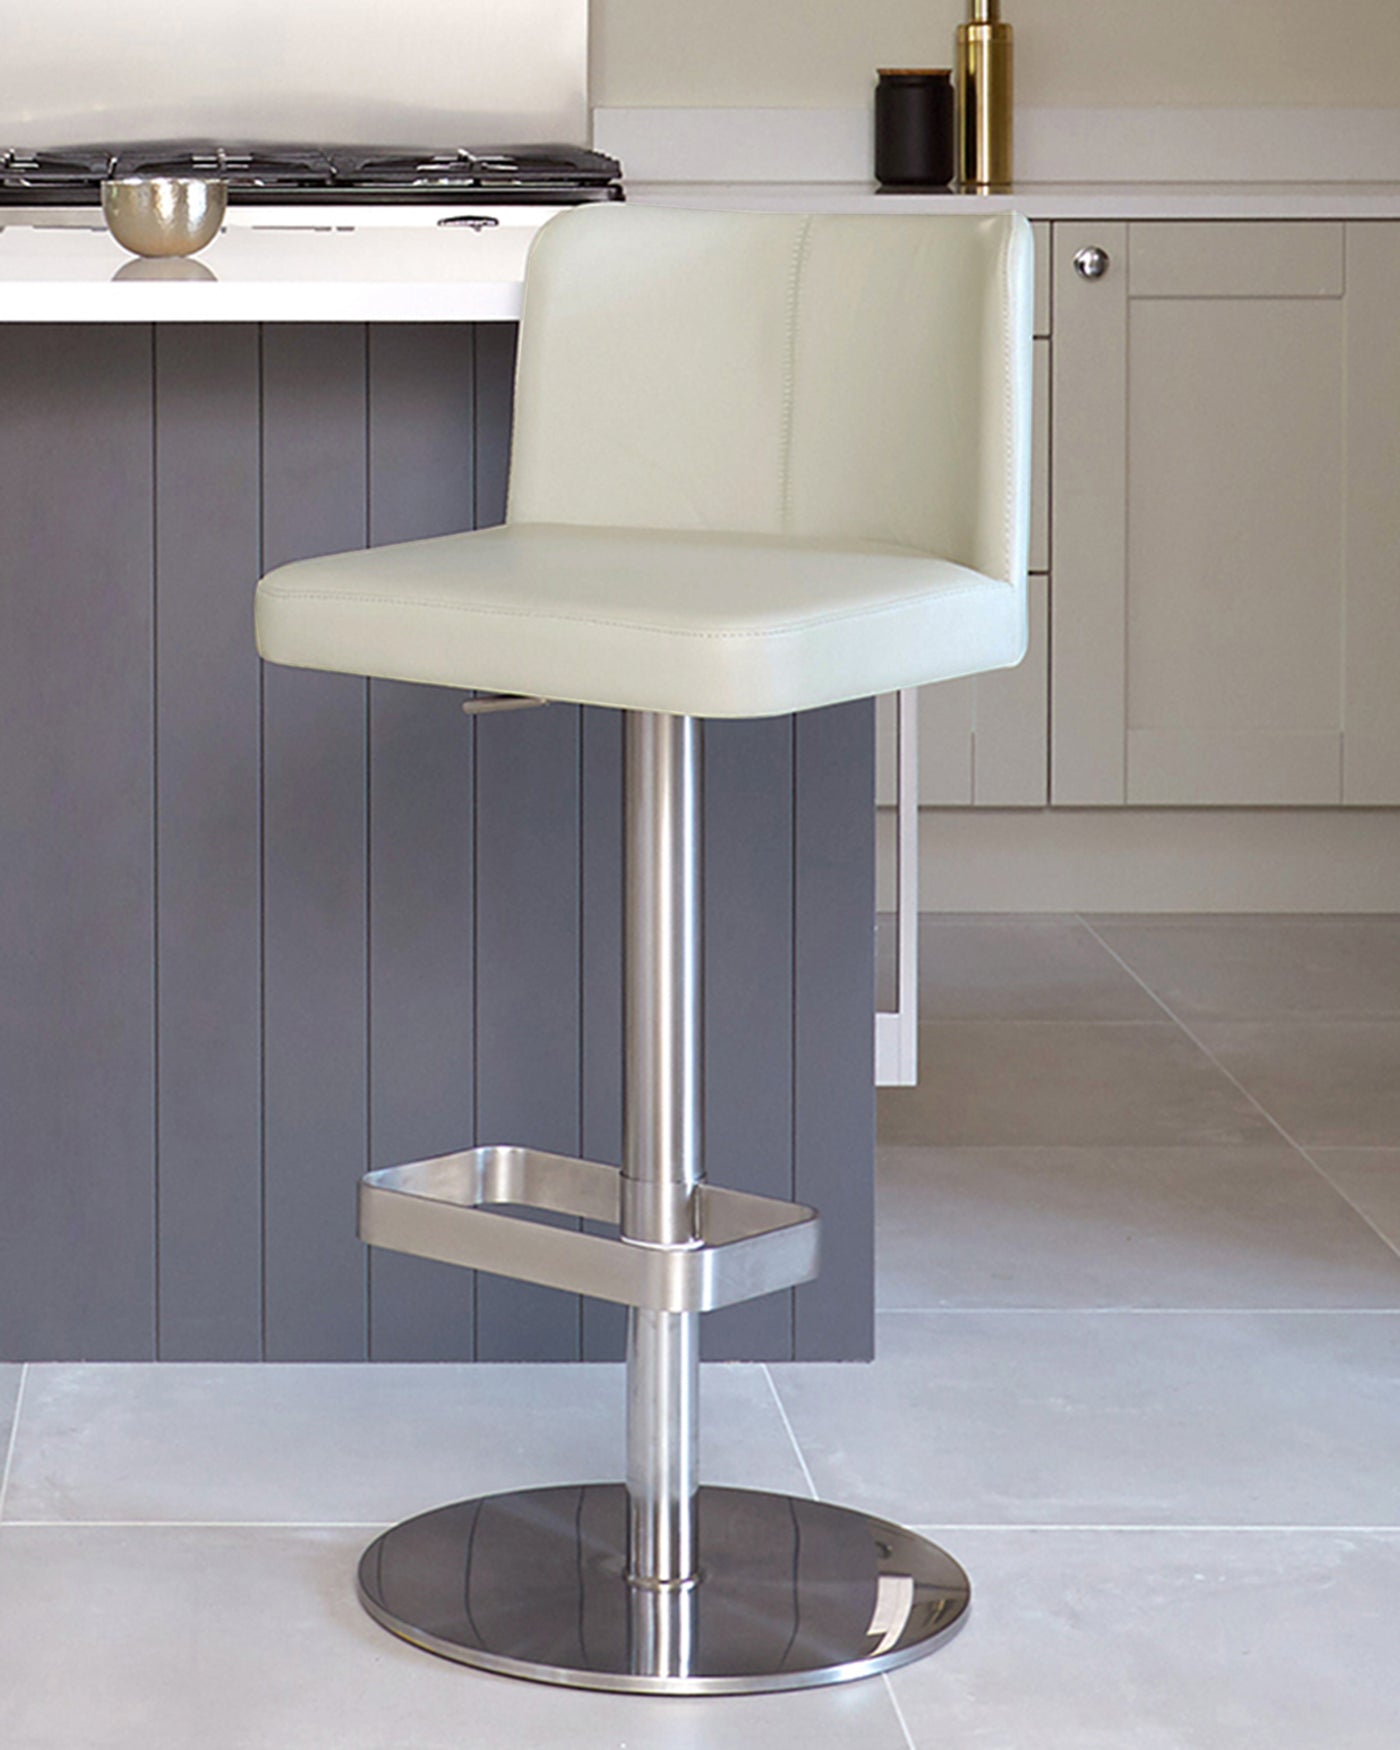 Modern bar stool with a cream faux leather seat, low backrest, and visible stitching details. The stool features a sleek chrome base, pedestal, and footrest. The design is contemporary and suitable for kitchen or bar counters.